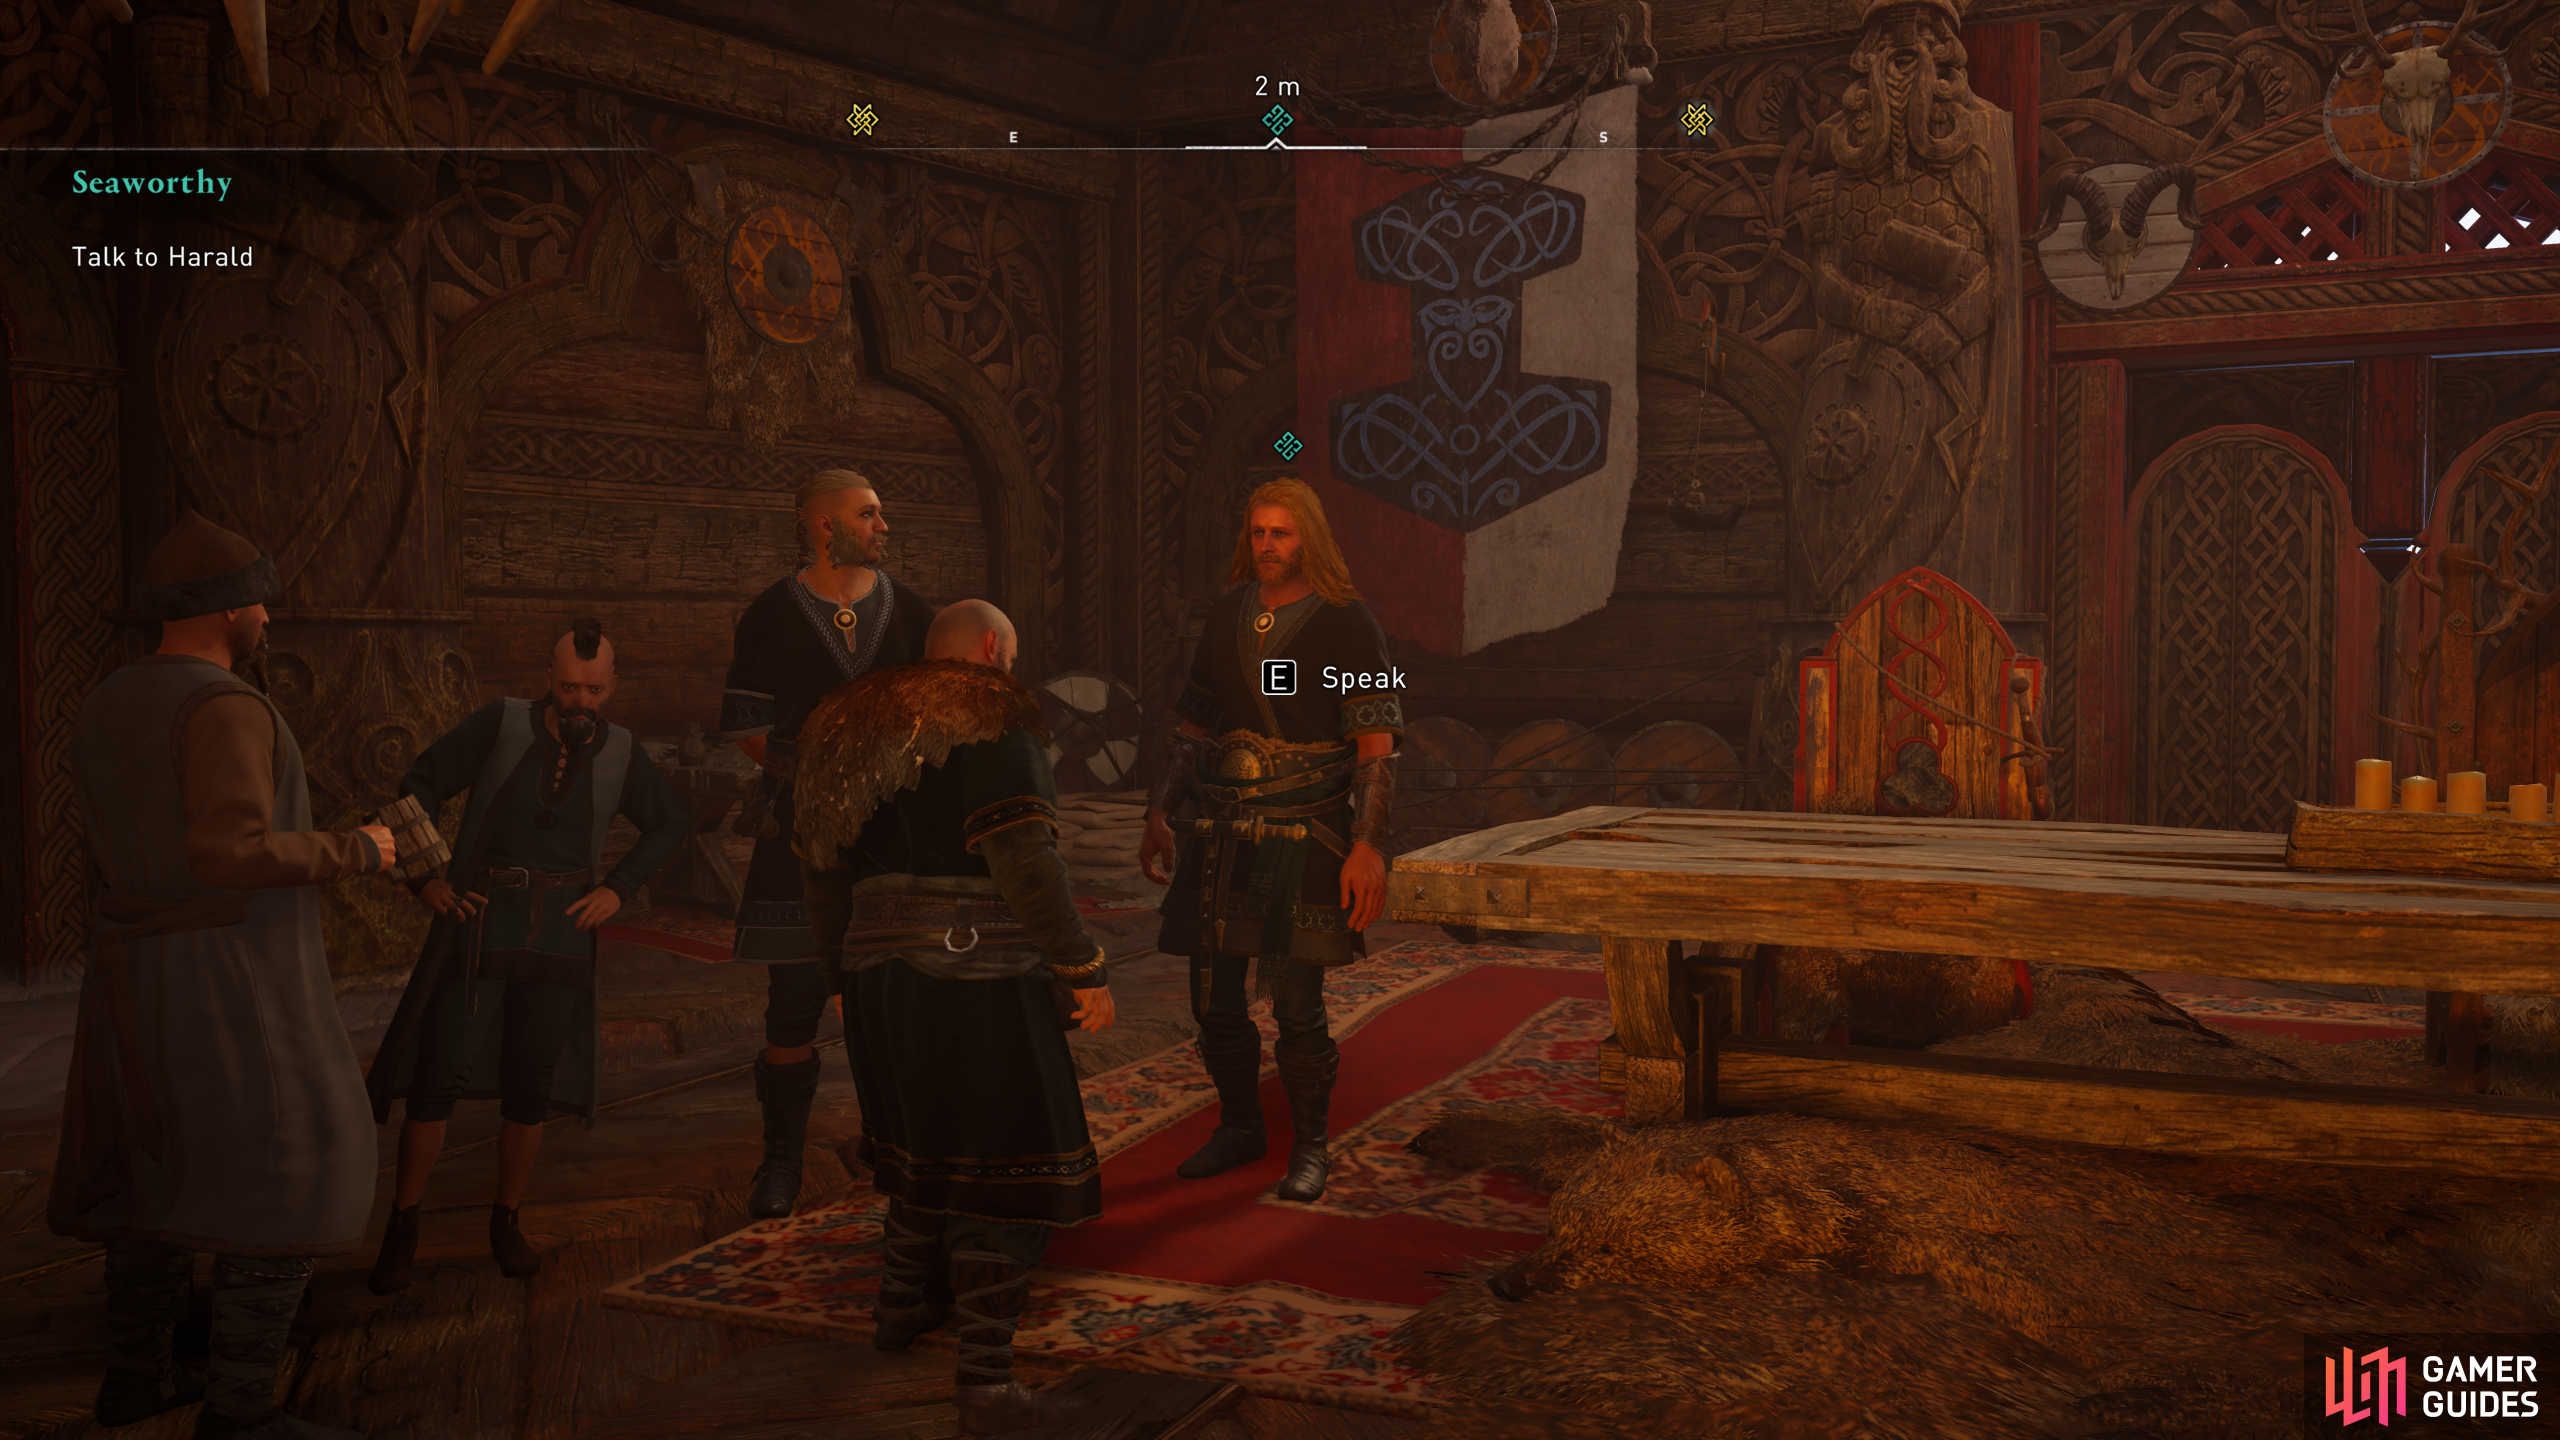 Speak with King Harald when you're ready to leave the longhouse.